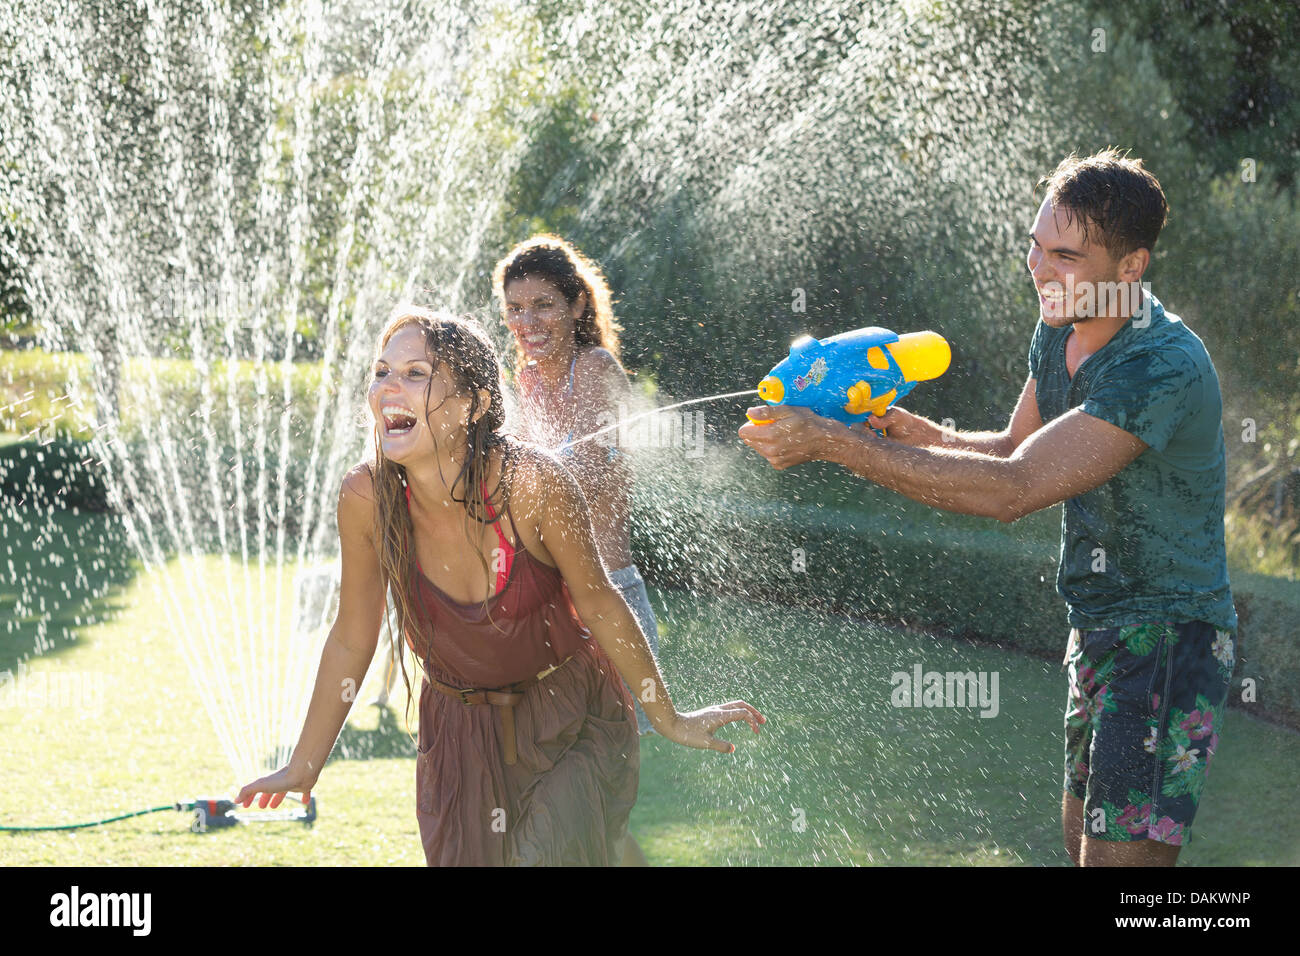 Friends playing with water guns in sprinkler in backyard Stock Photo